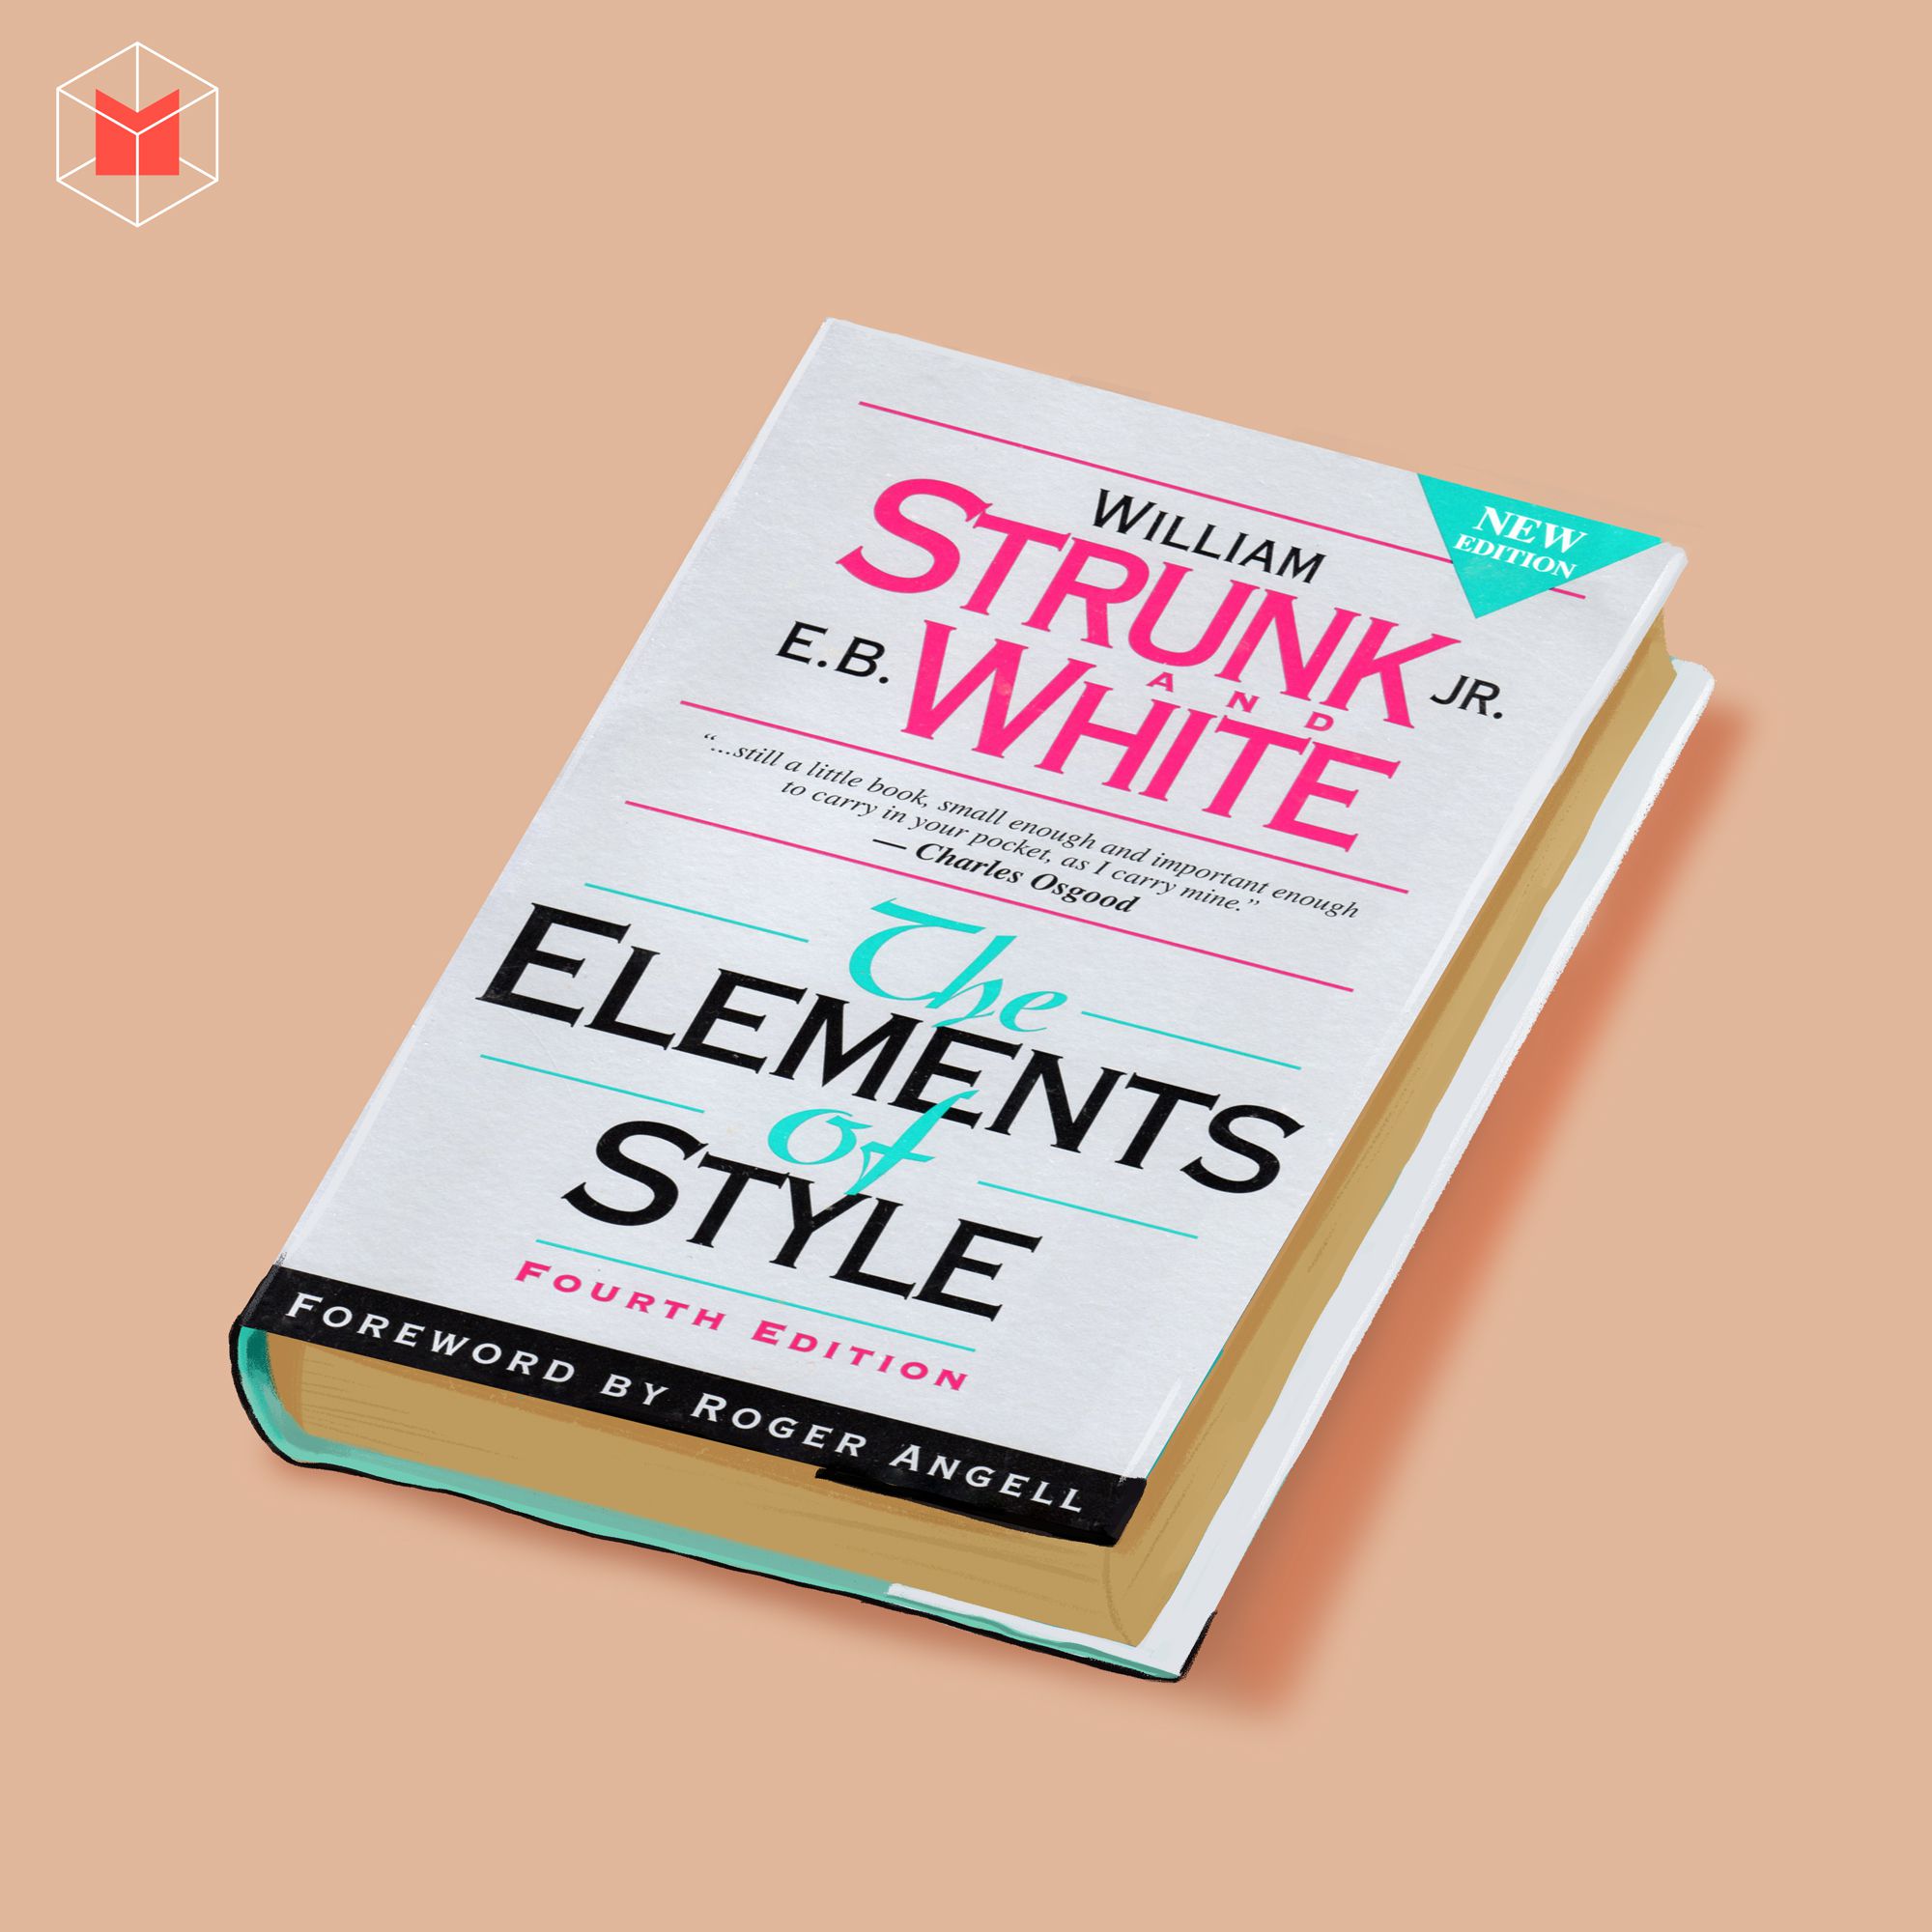 the elements of style william strunk pdf